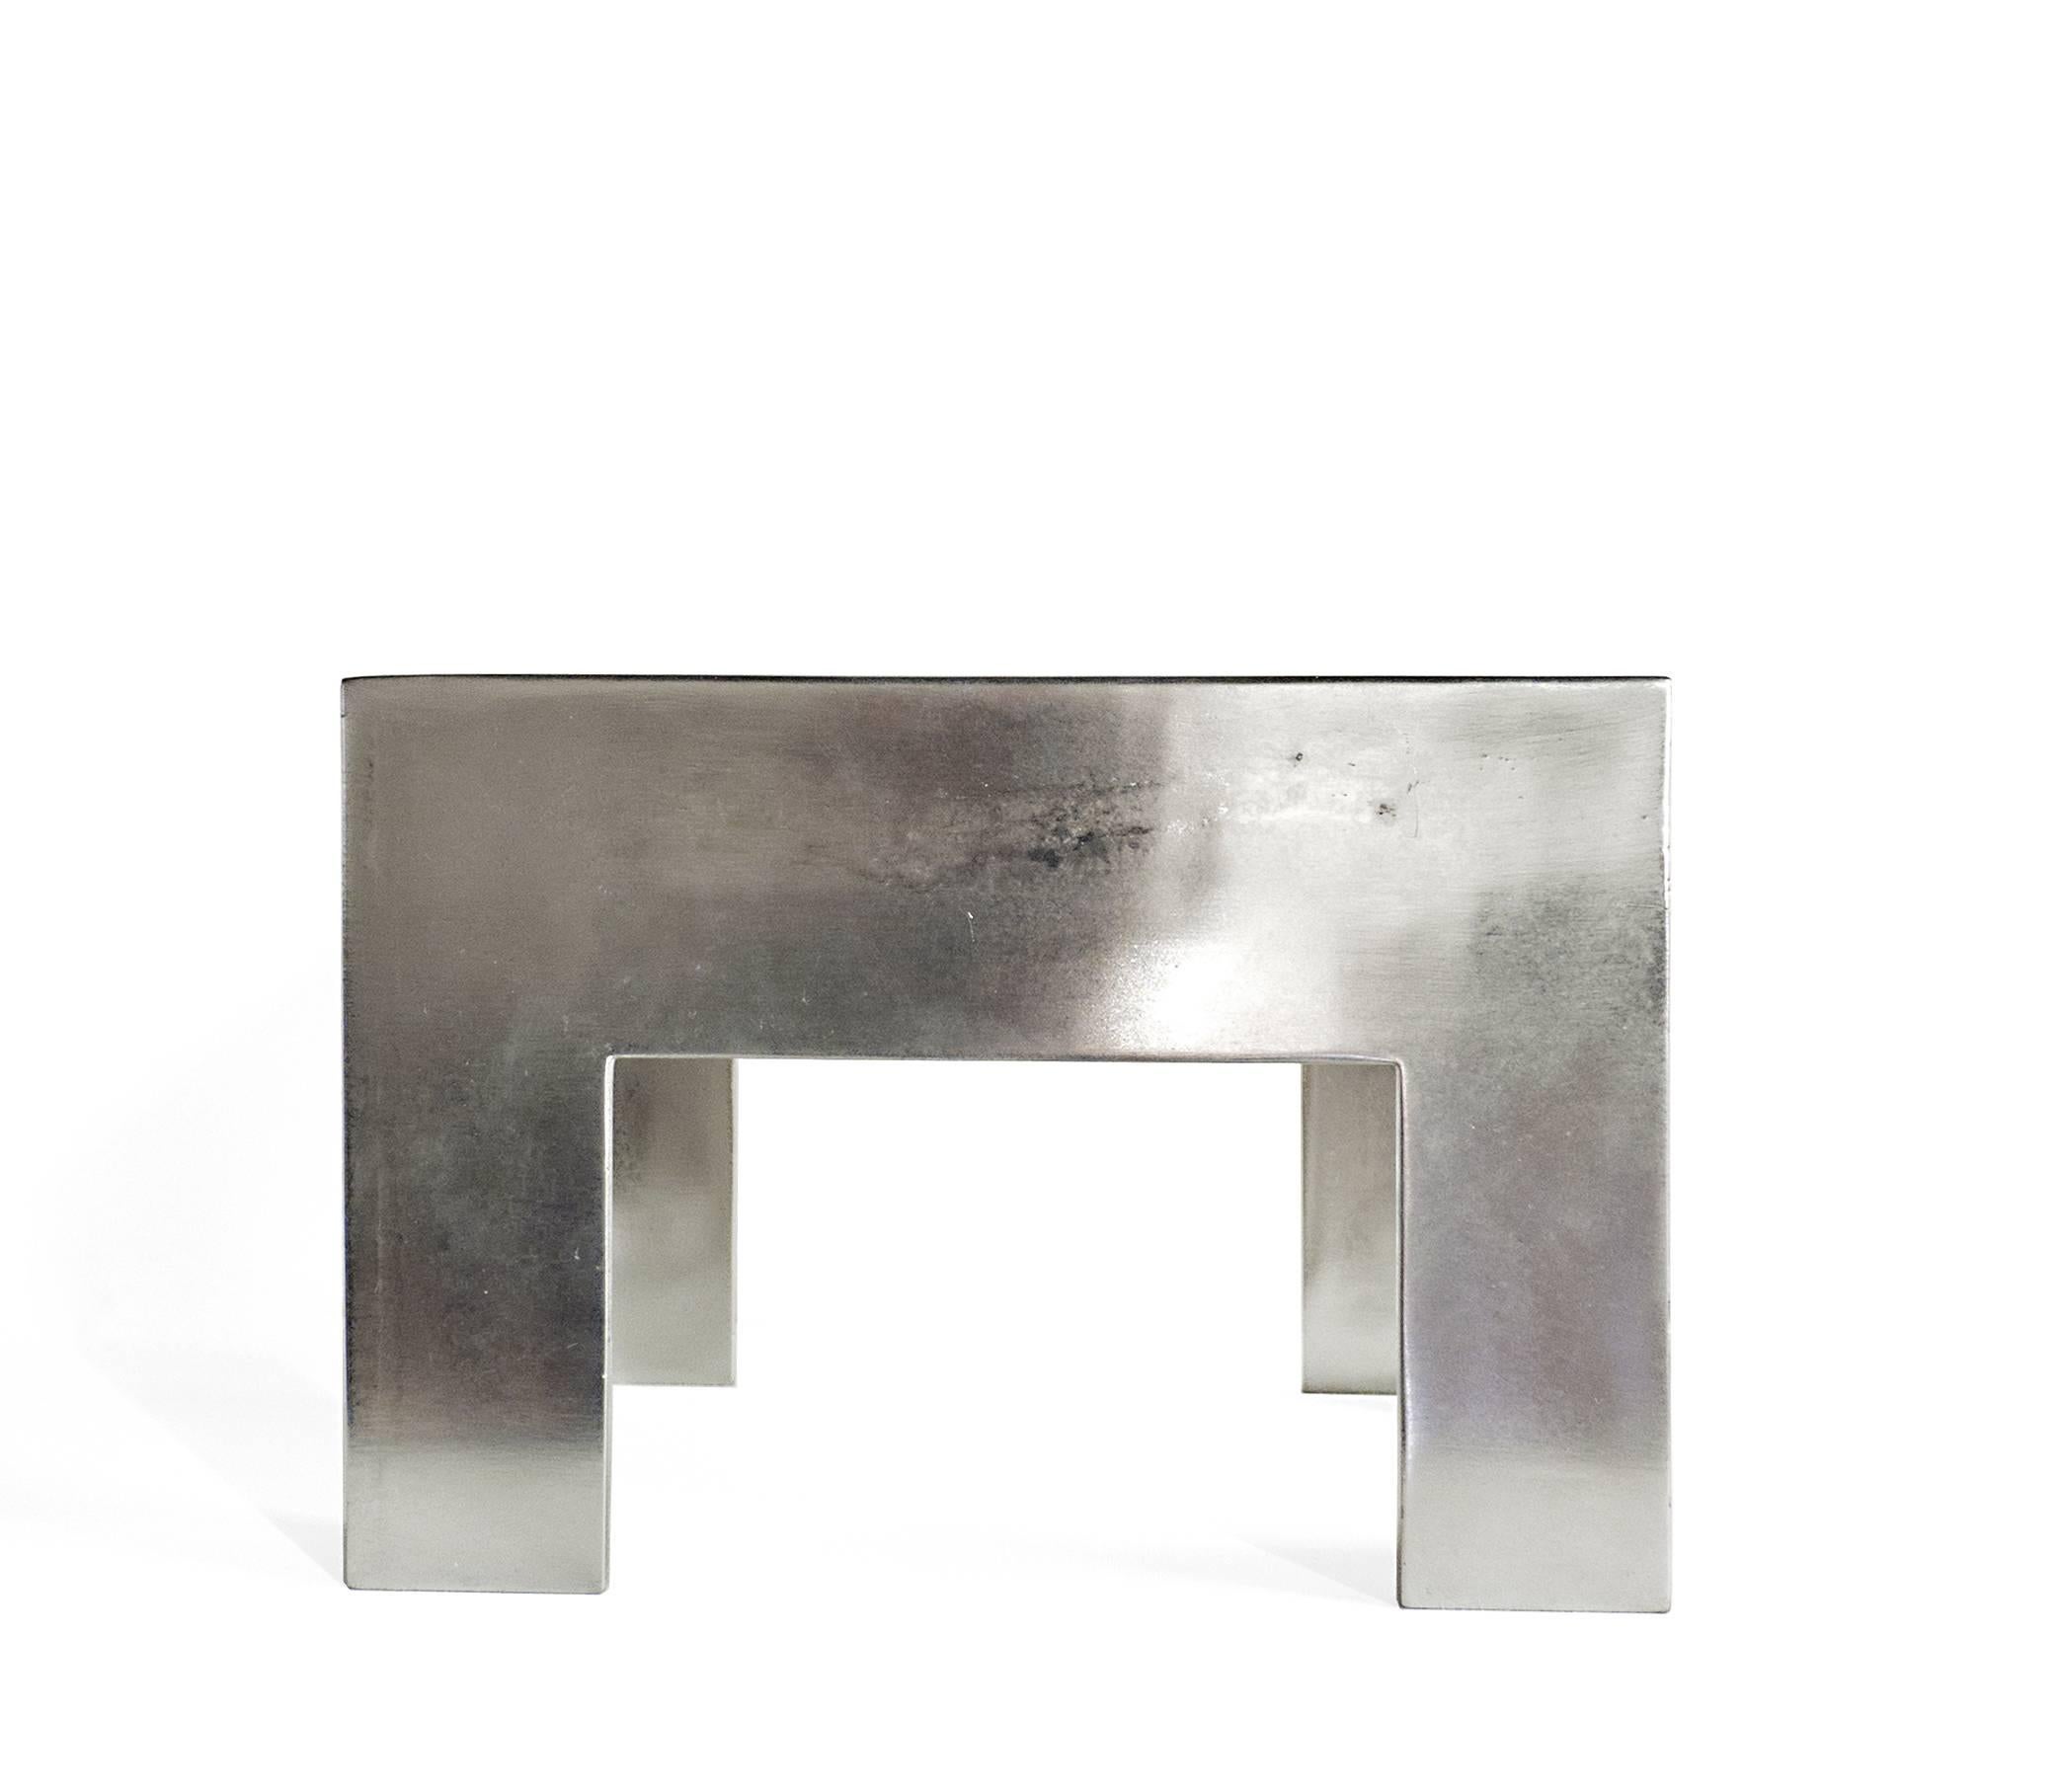 Limited Edition centerpiece in cast pewter, hand finished with welding and brush polishing.

Numbered and signed.